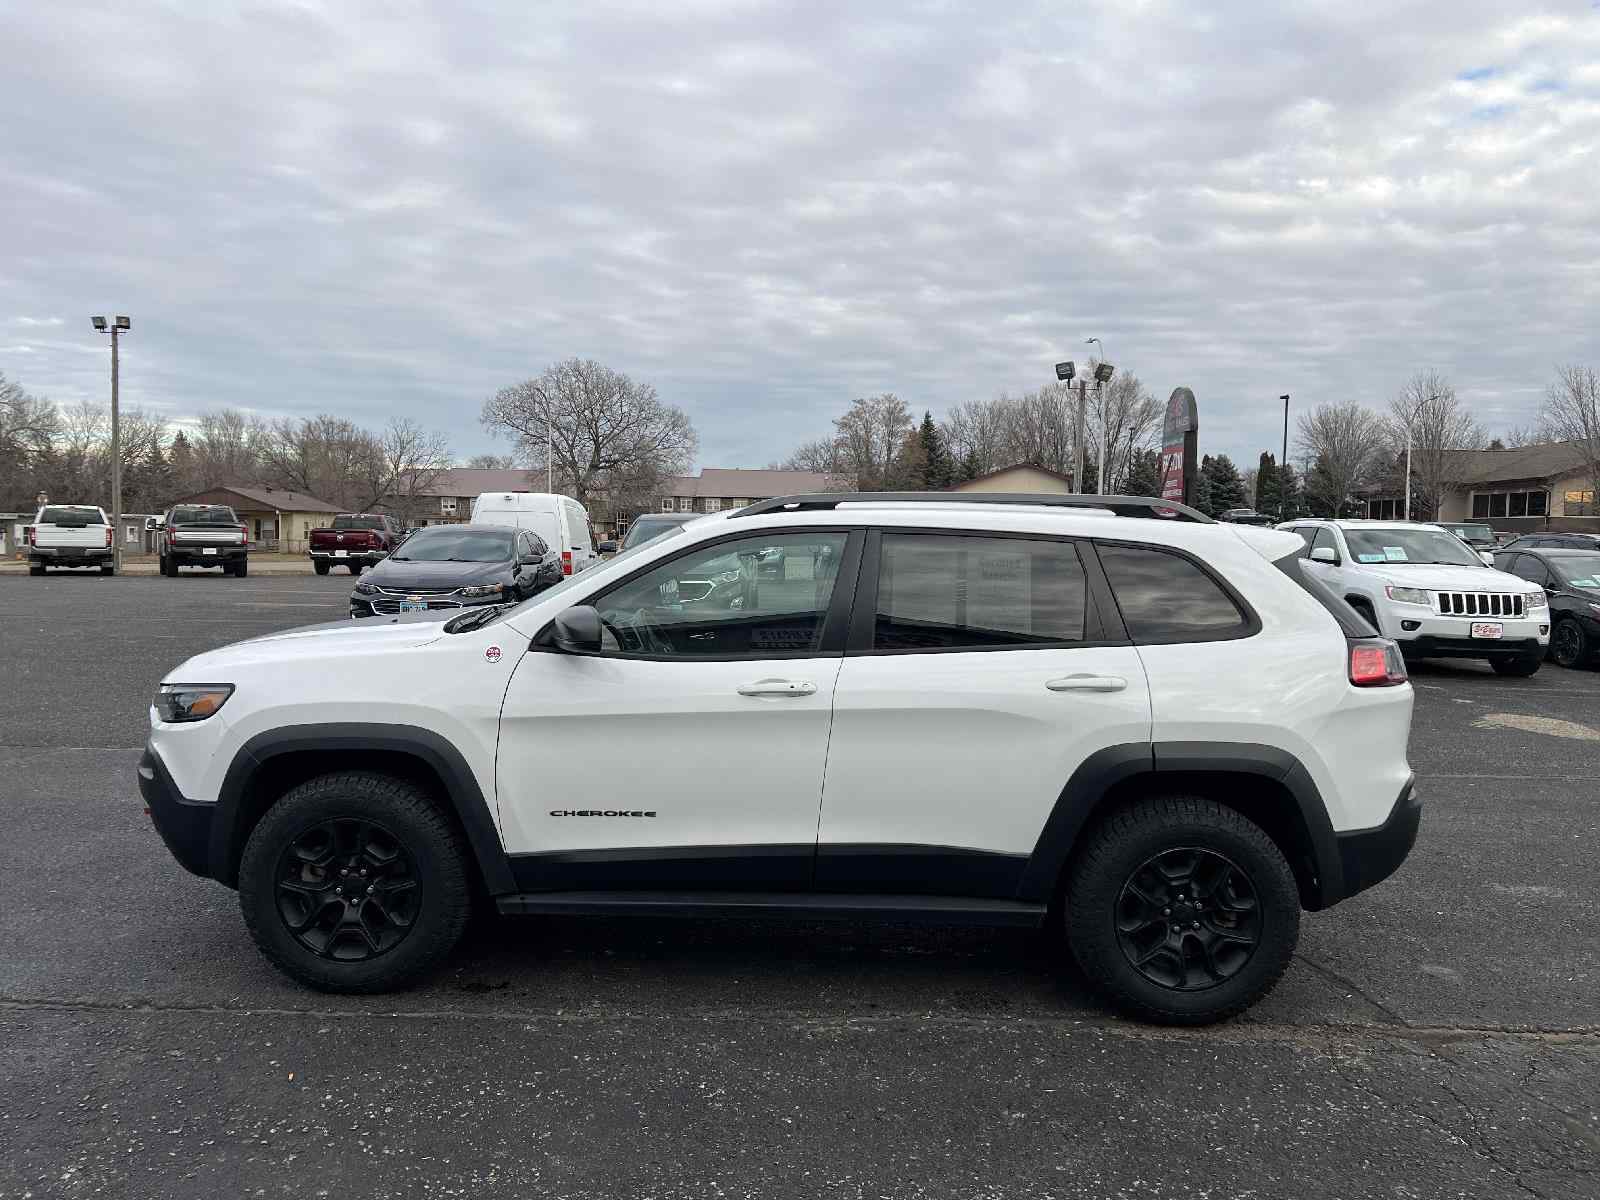 2019-jeep-cherokee-trailhawk-for-sale-01